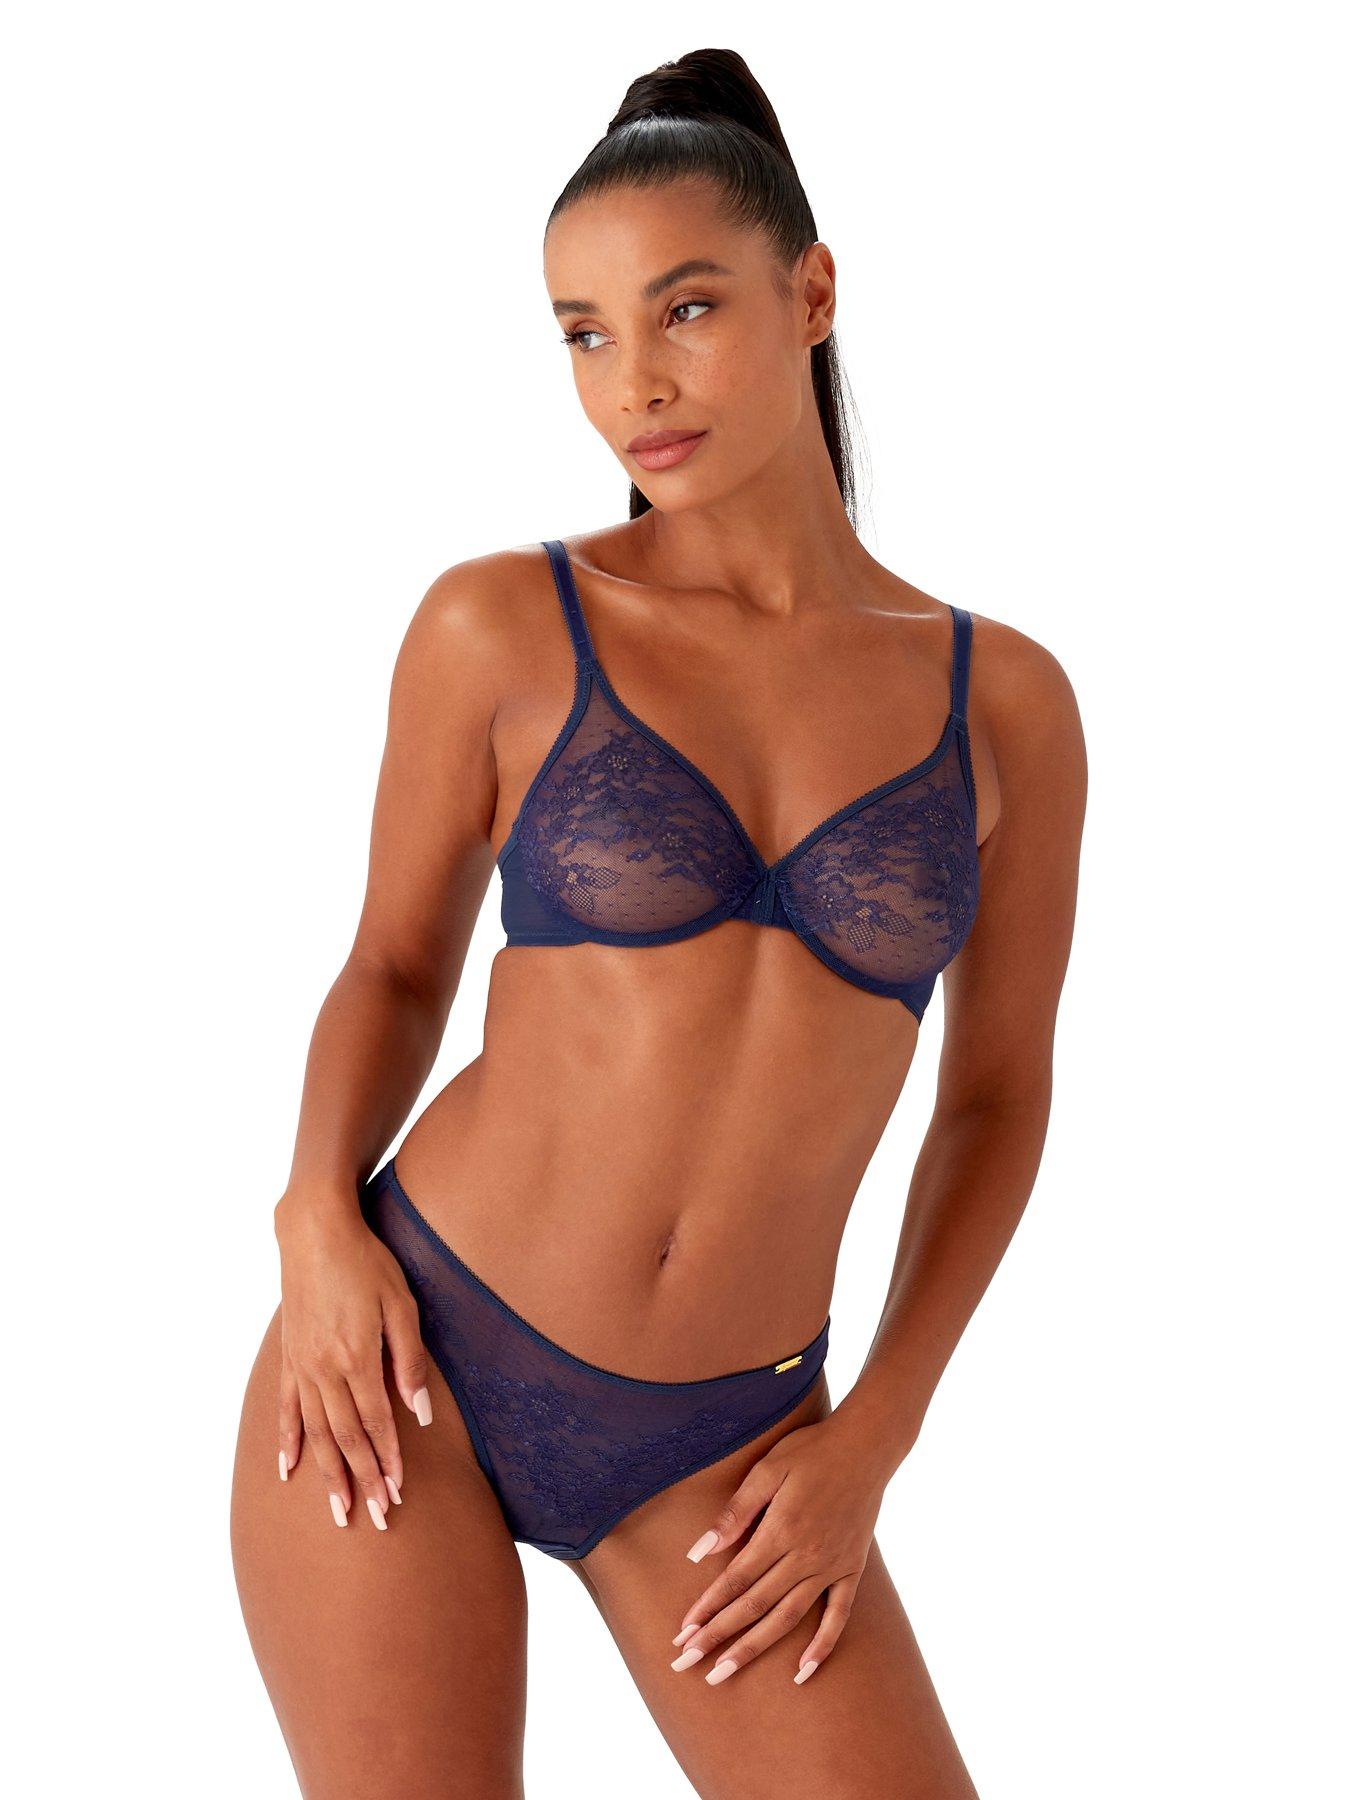 Glossies Lace Collection, Women's luxury Lingerie